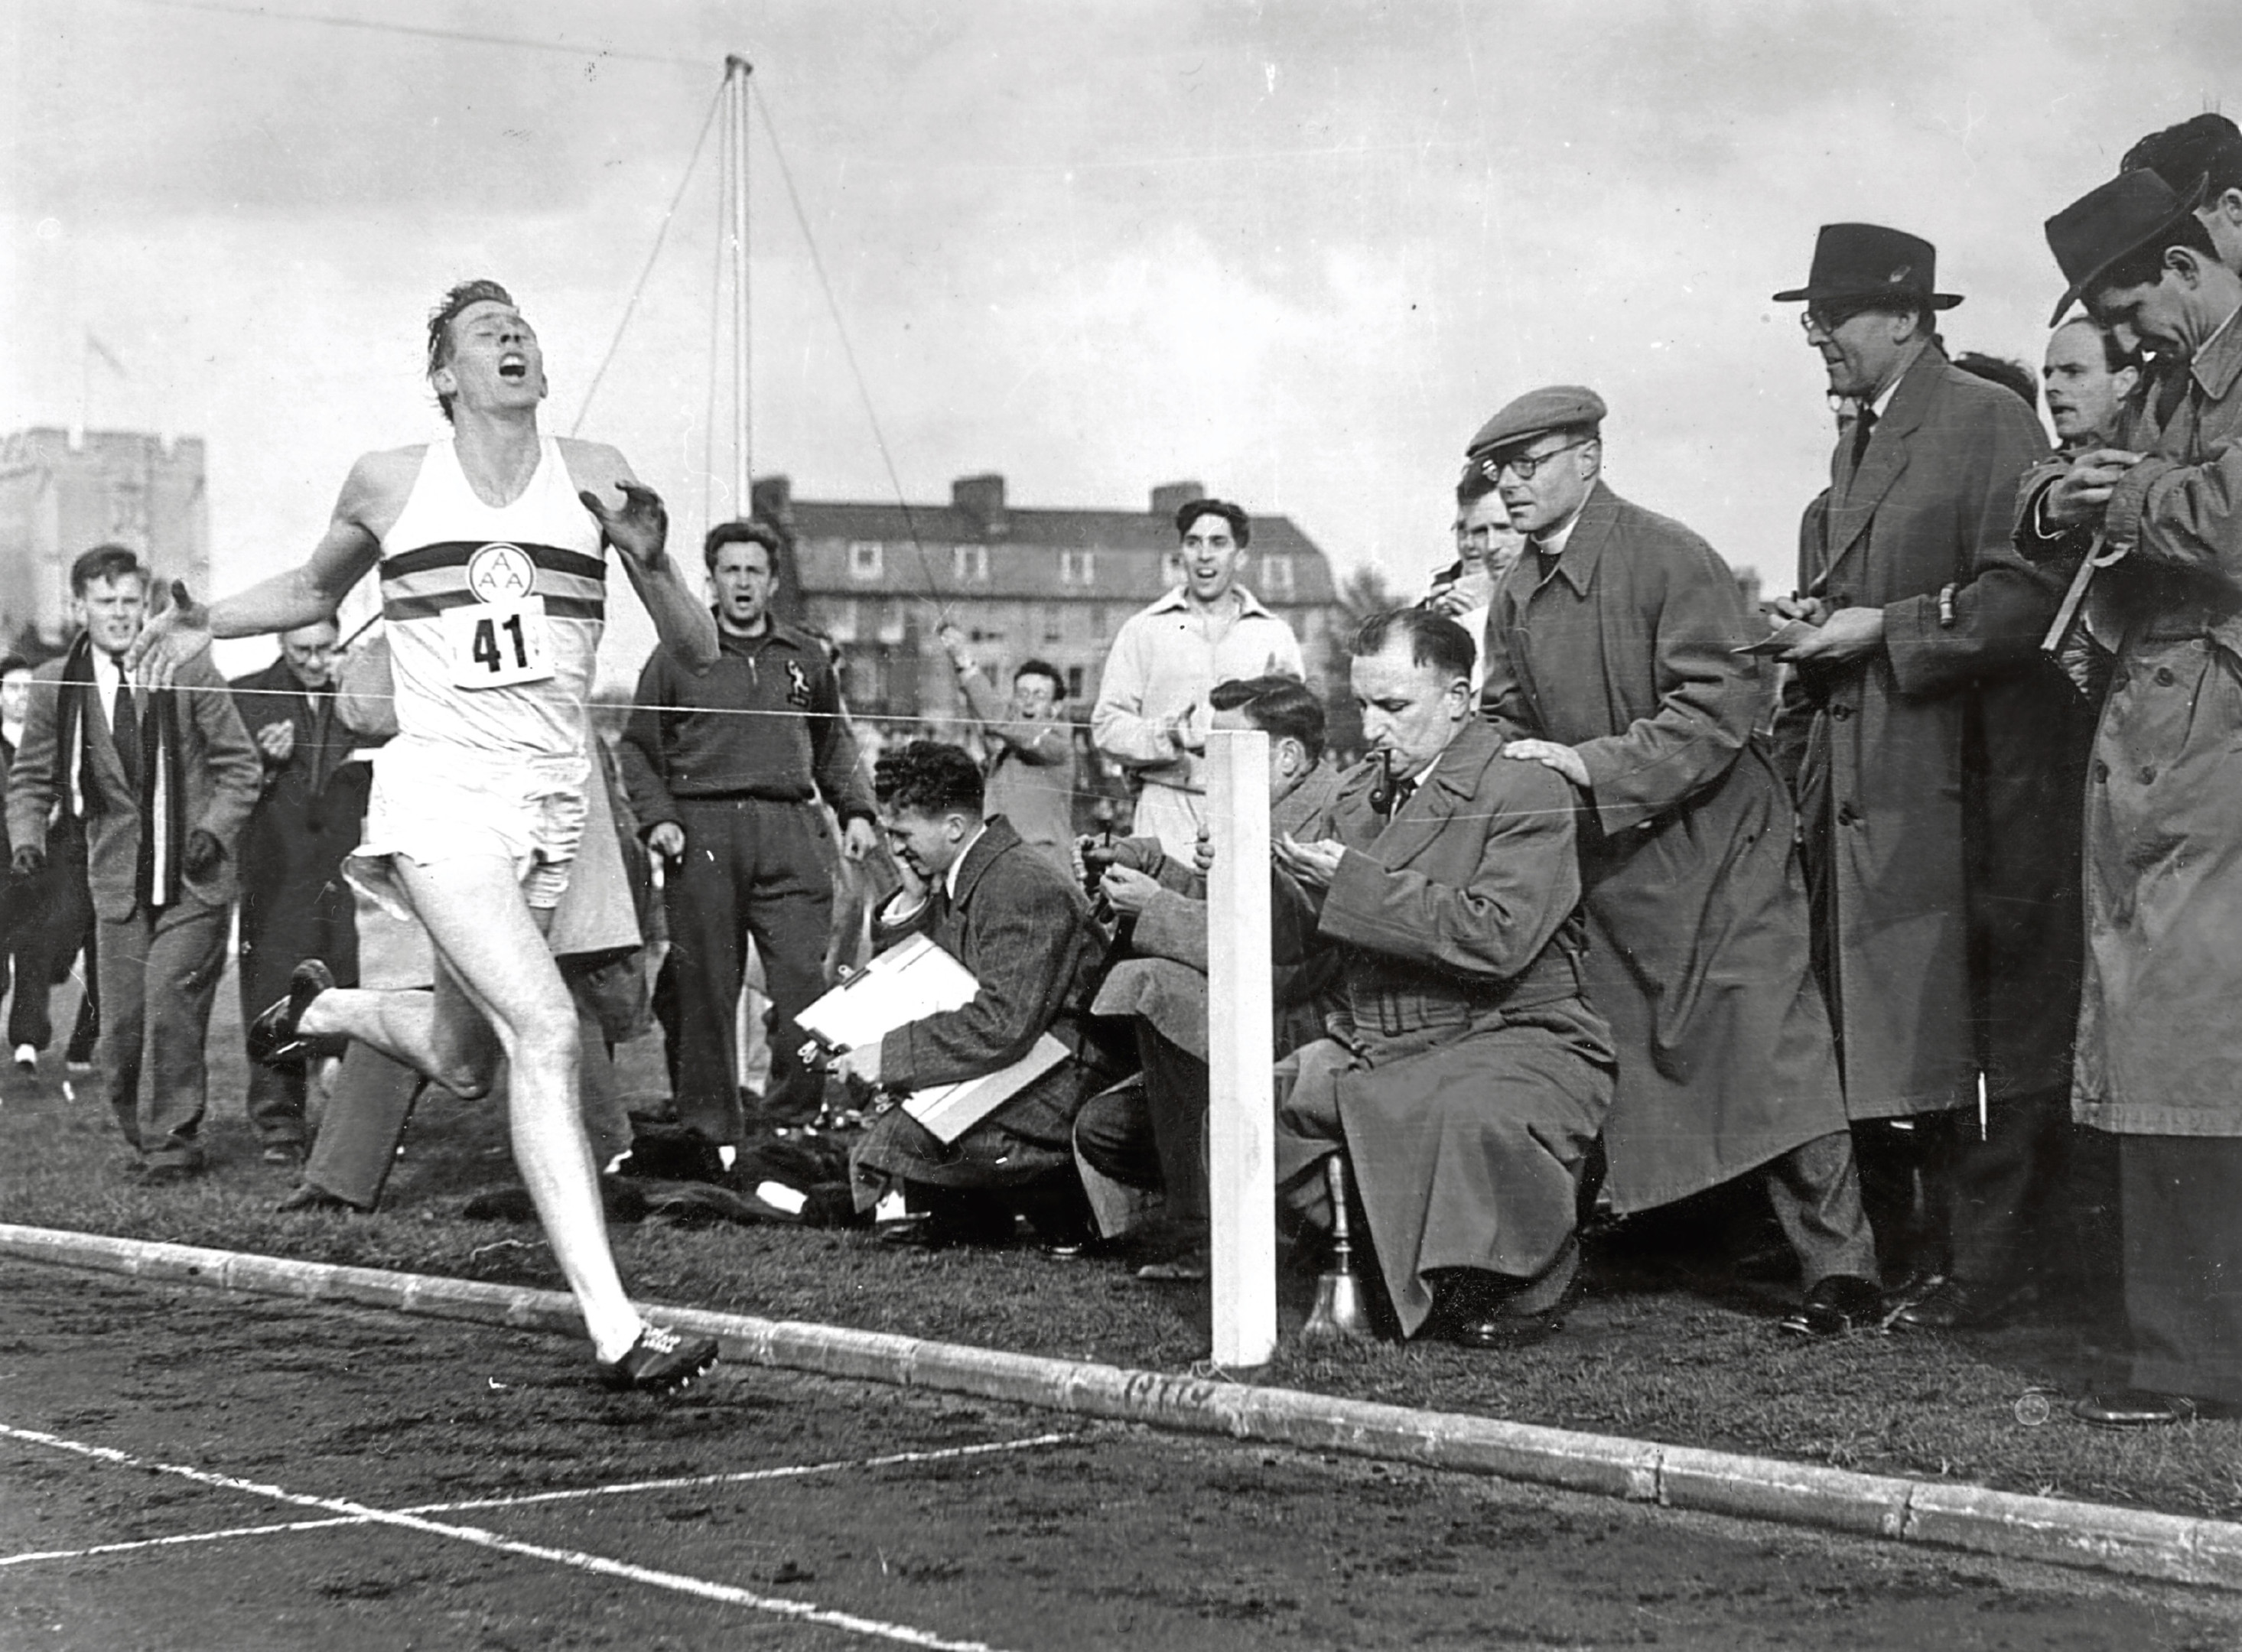 Roger Bannister about to cross the tape at the end of his record breaking mile run (Norman Potter/Central Press/Getty Images)